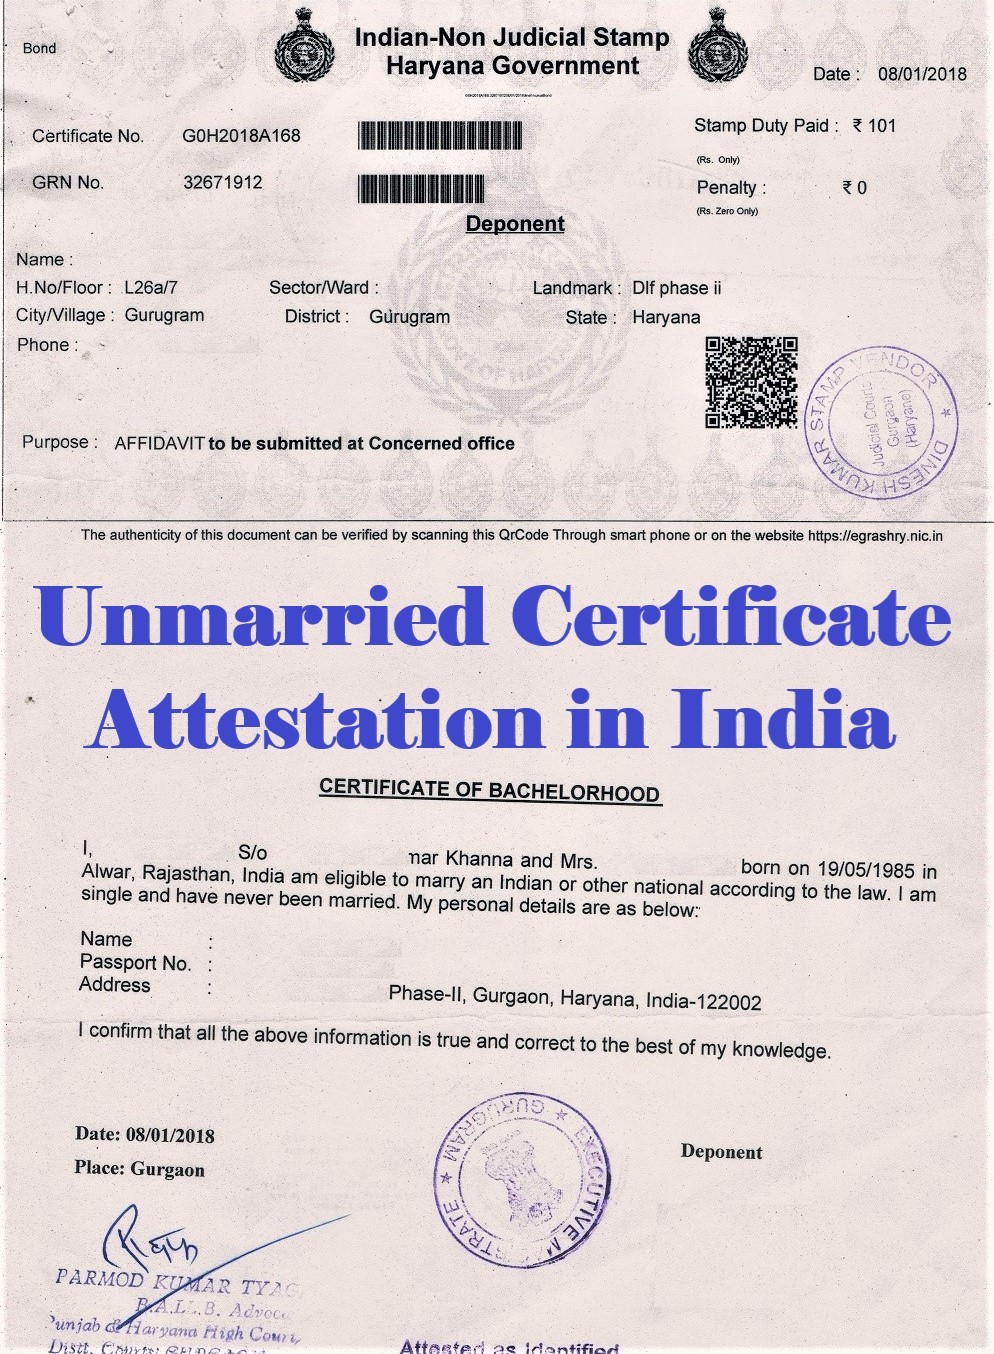 Unmarried Certificate Attestation from Indonesia Embassy